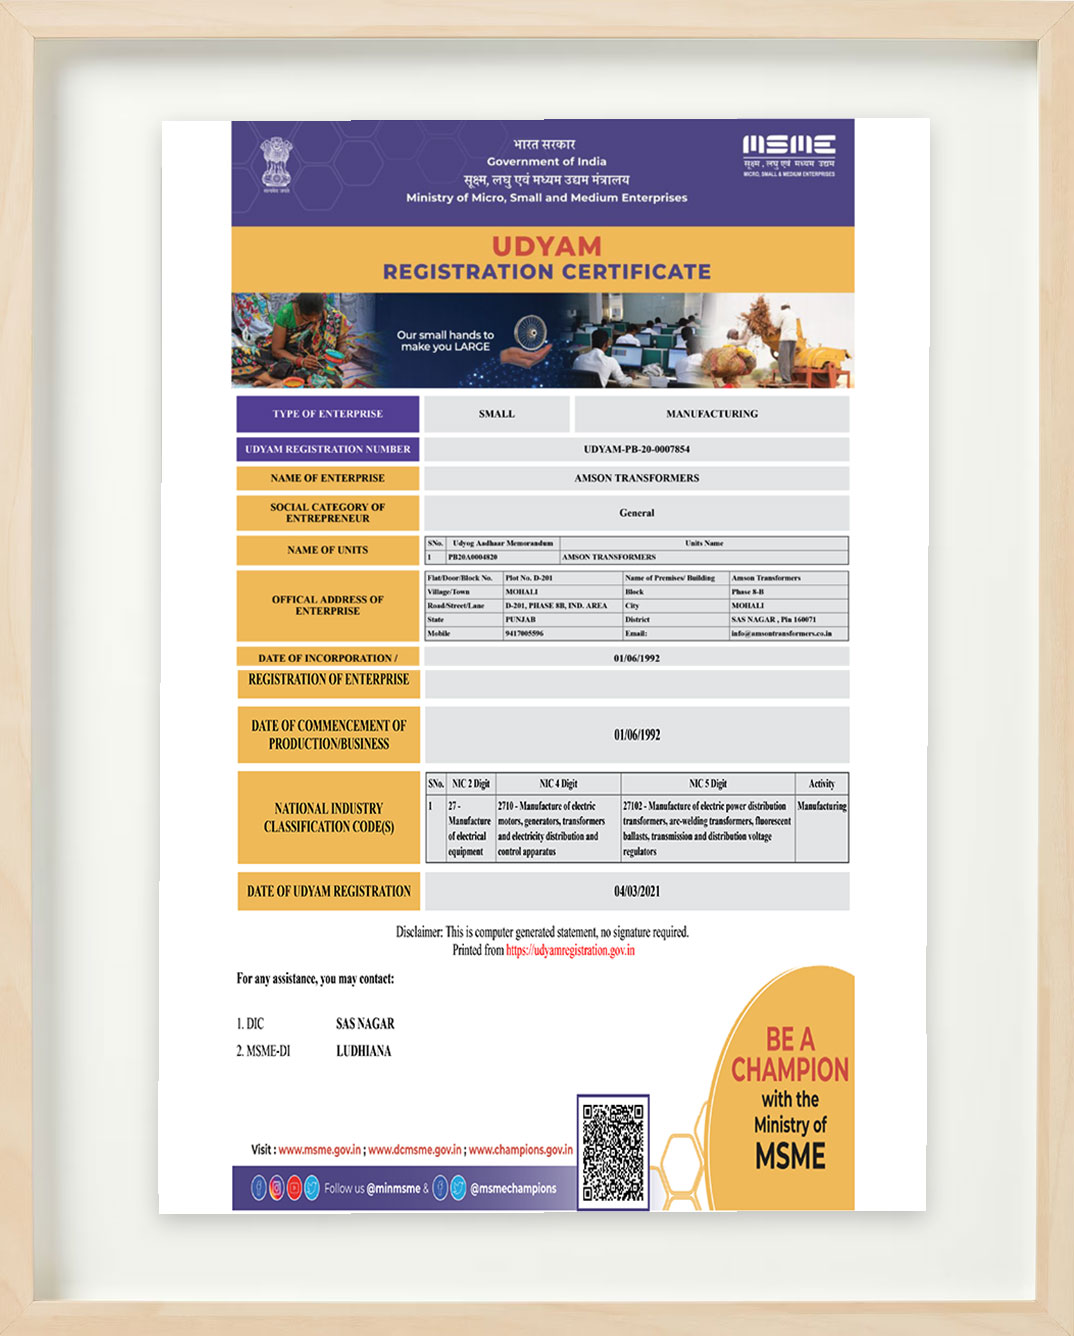 Our Certification, Amson Transformers